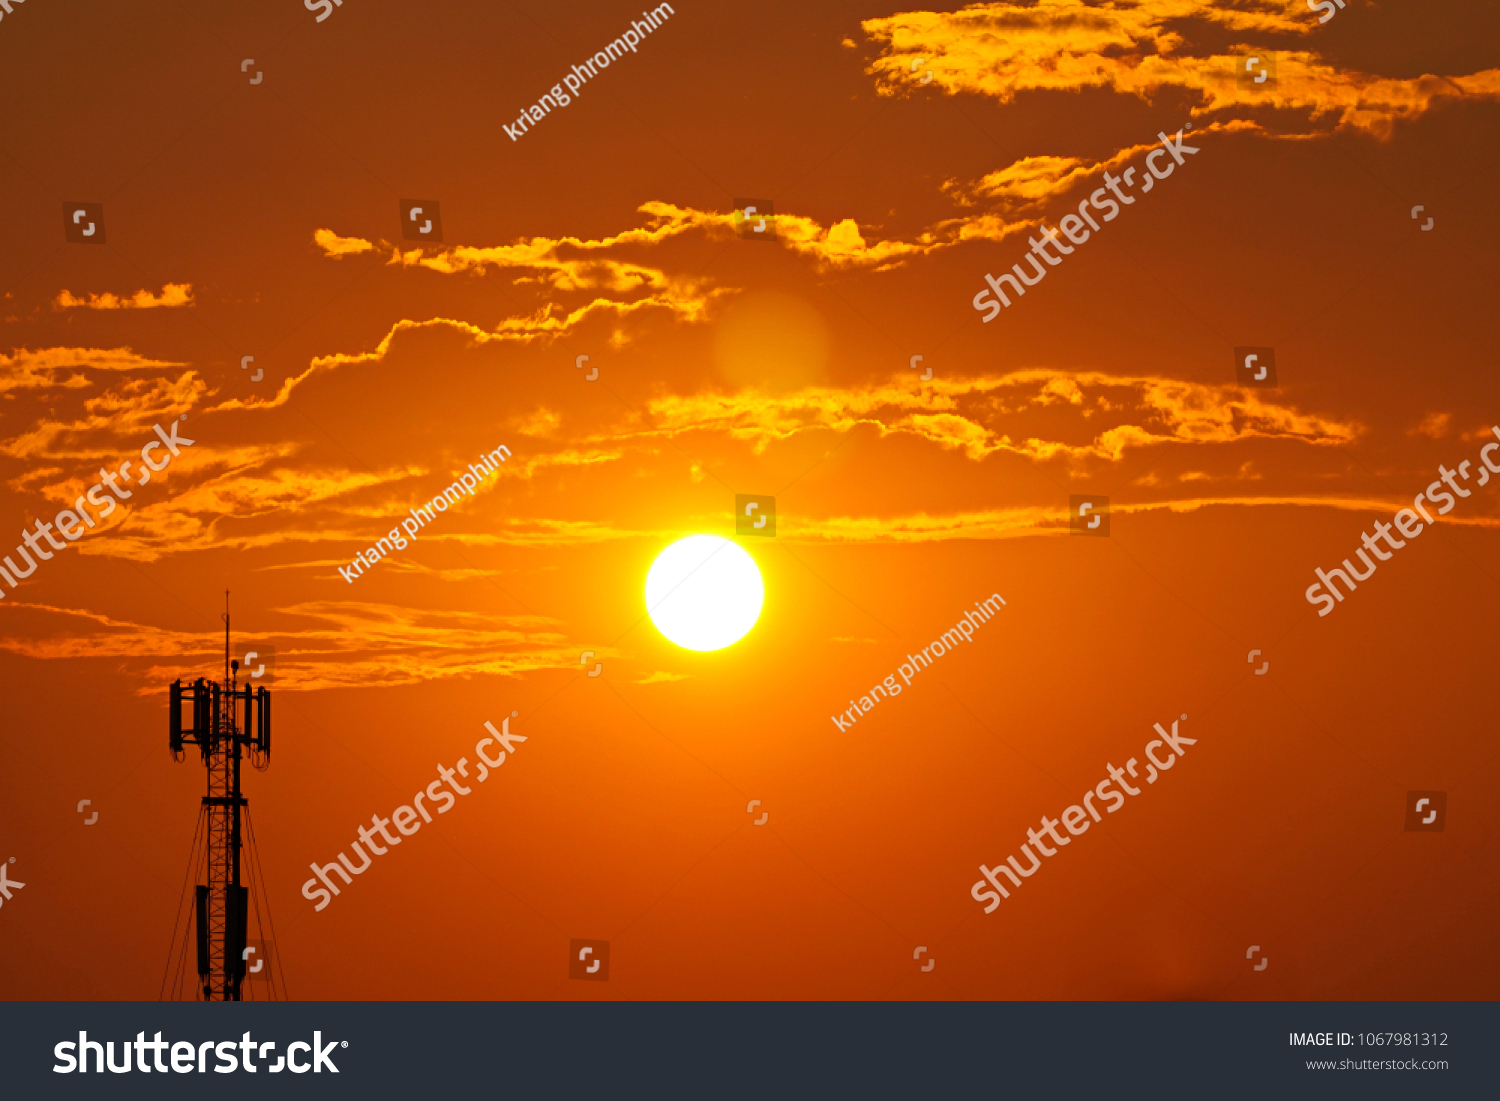 3G, 4G, Cell Site, Cellular telephone site, Cellular tower, cellular antenna on the background of sunset. #1067981312